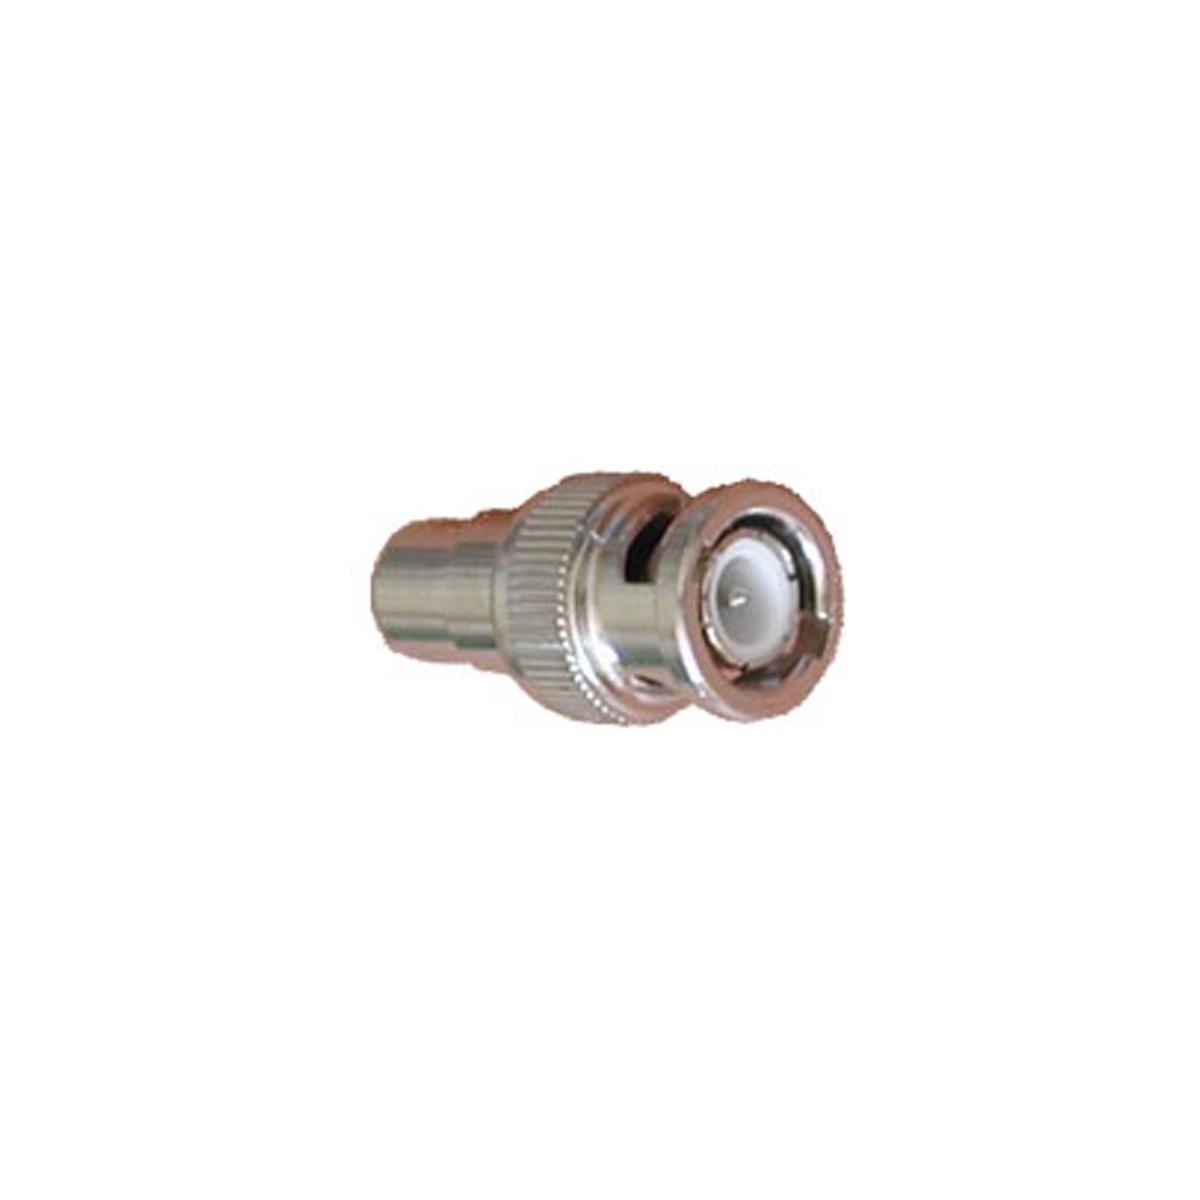 Image of Audio 2000s ACC3154 BNC Male Connector to Female RCA Jack